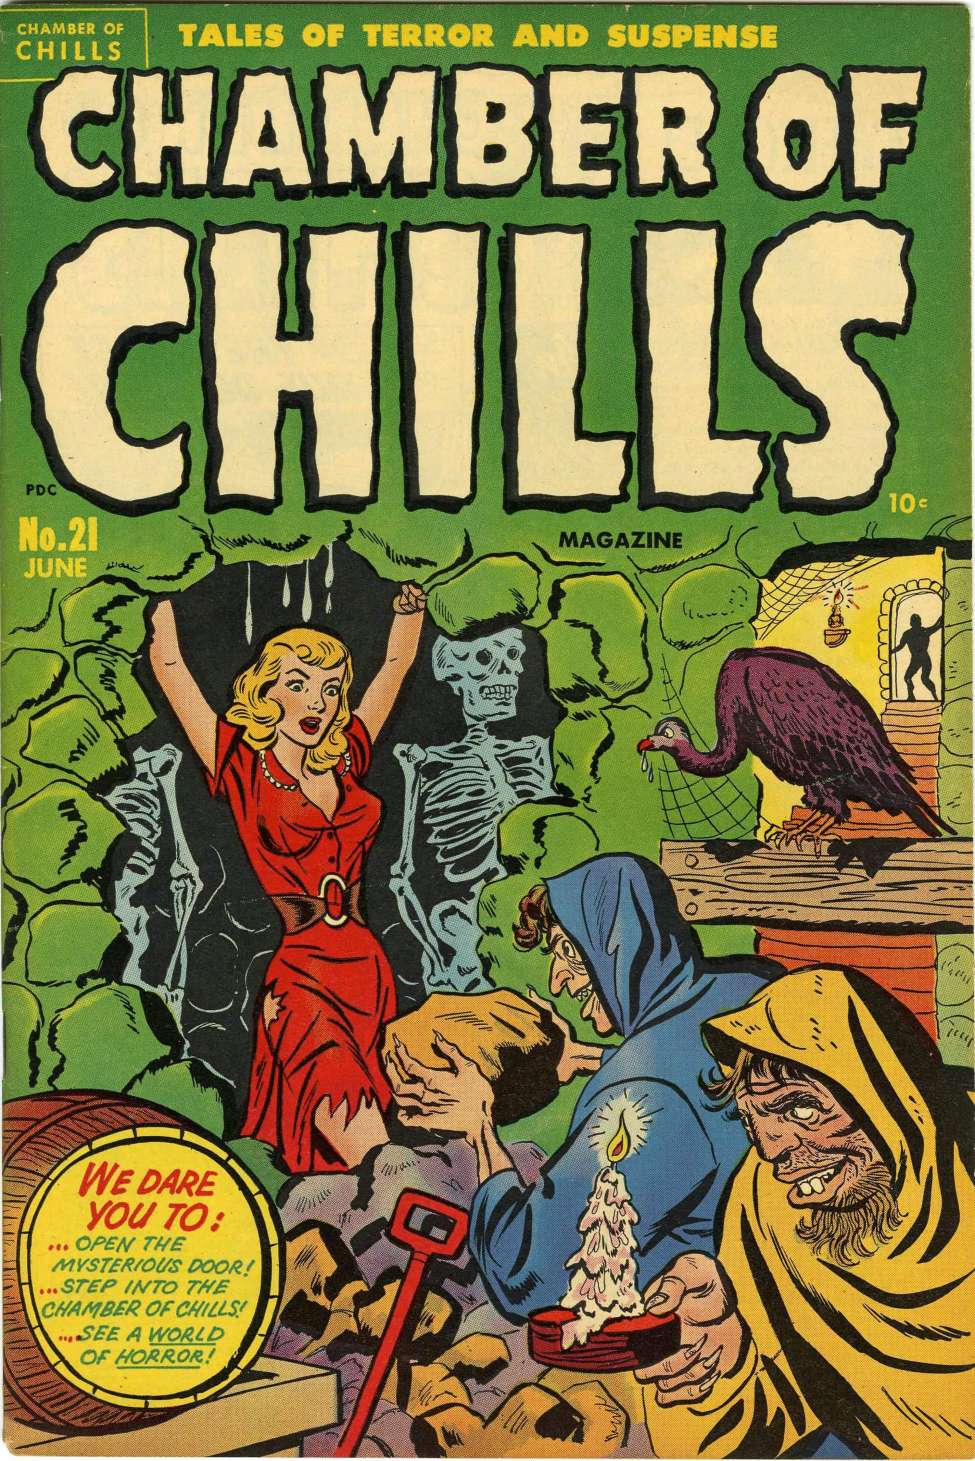 Book Cover For Chamber of Chills 1 (21)